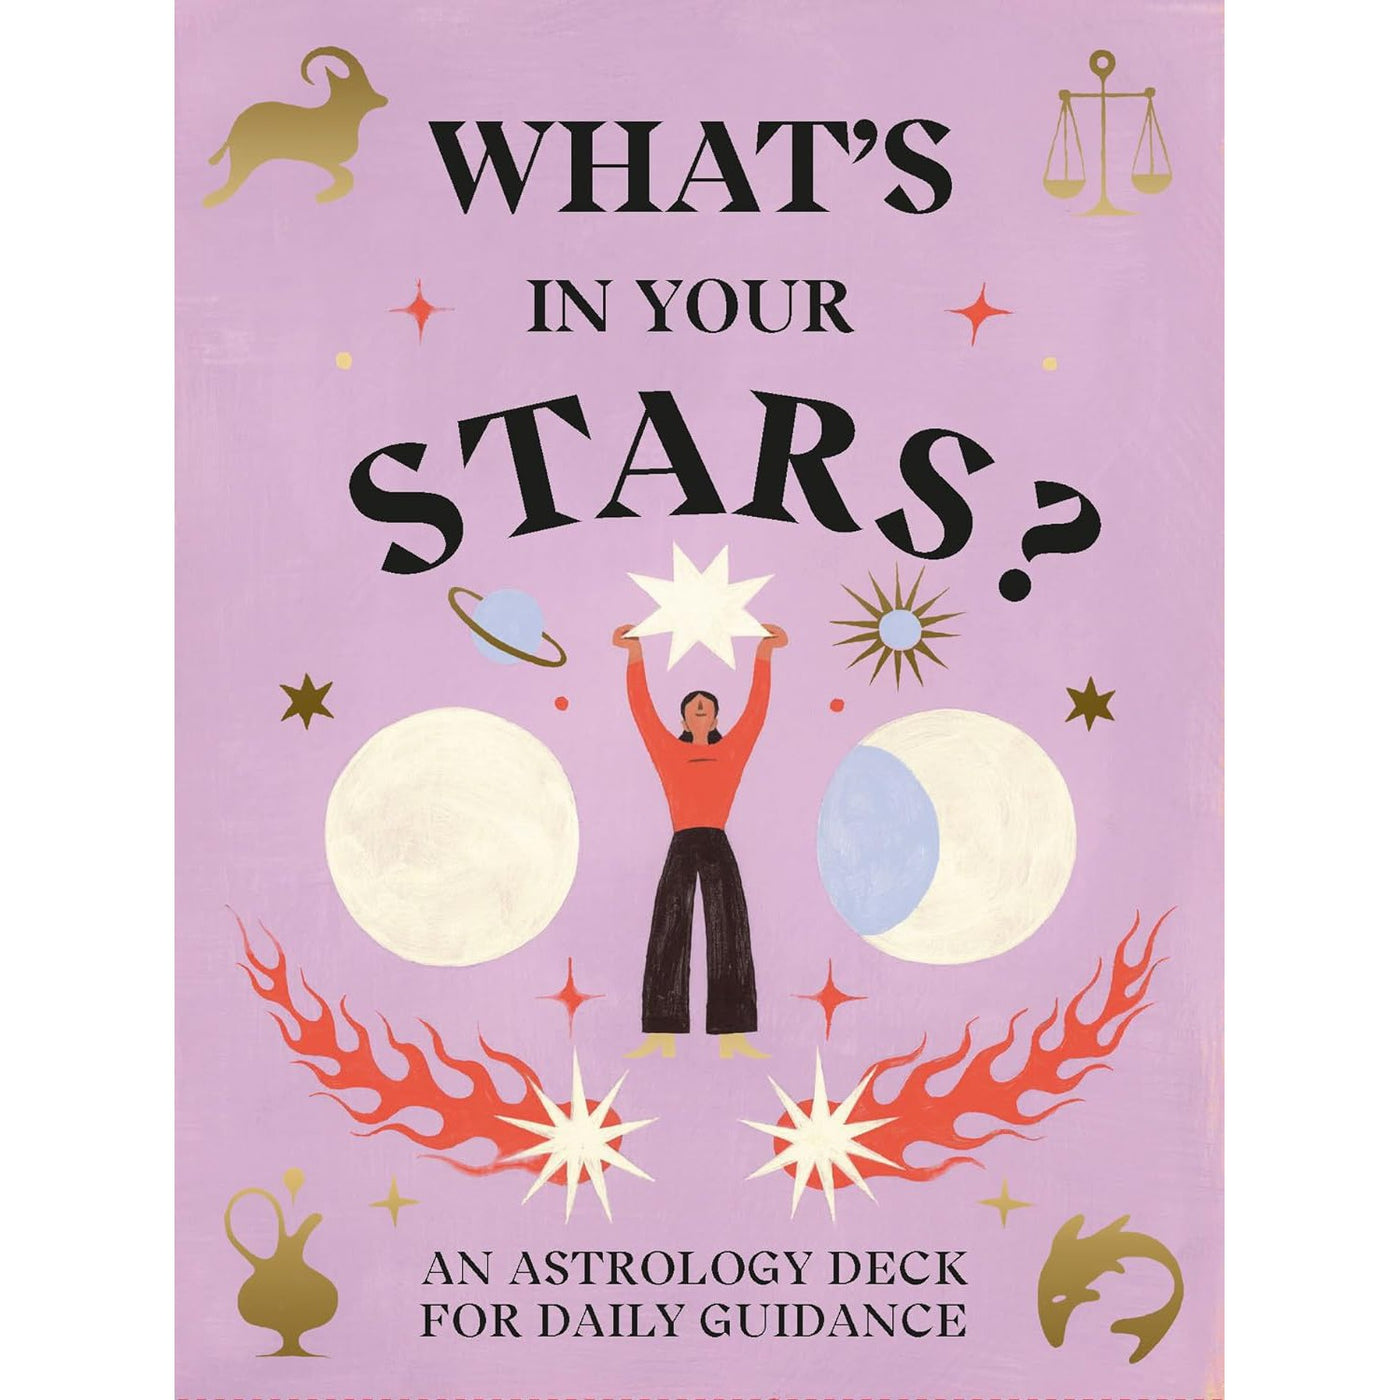 What's In Your Stars?